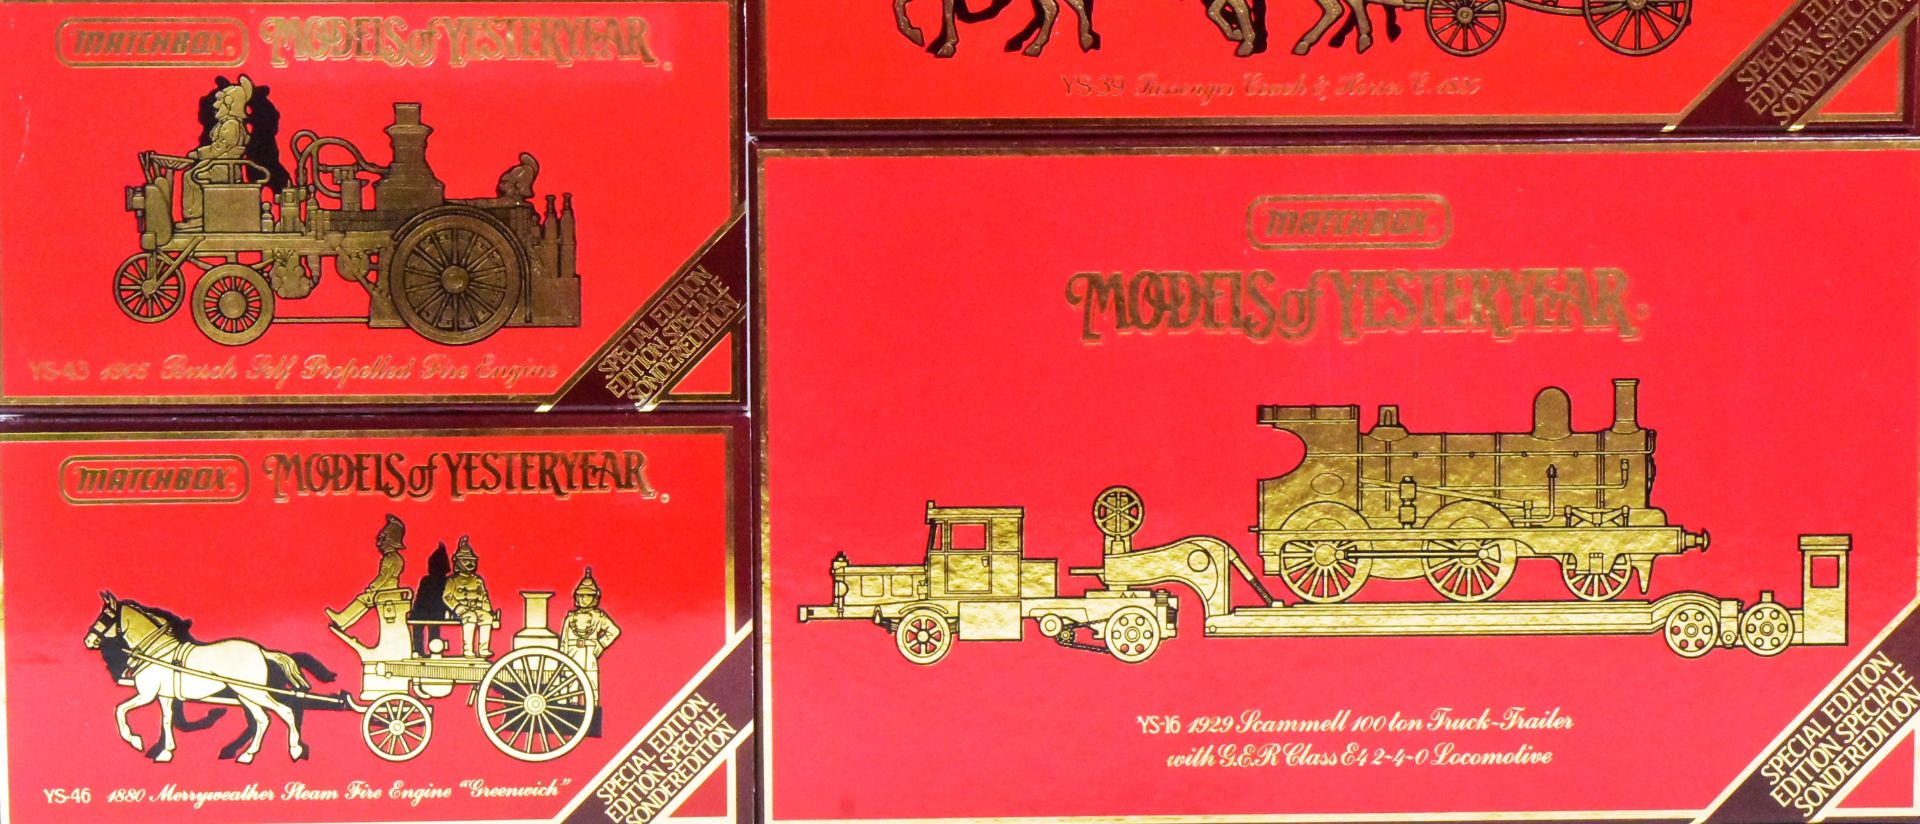 DIECAST - MATCHBOX MODELS OF YESTERYEAR - Image 3 of 6